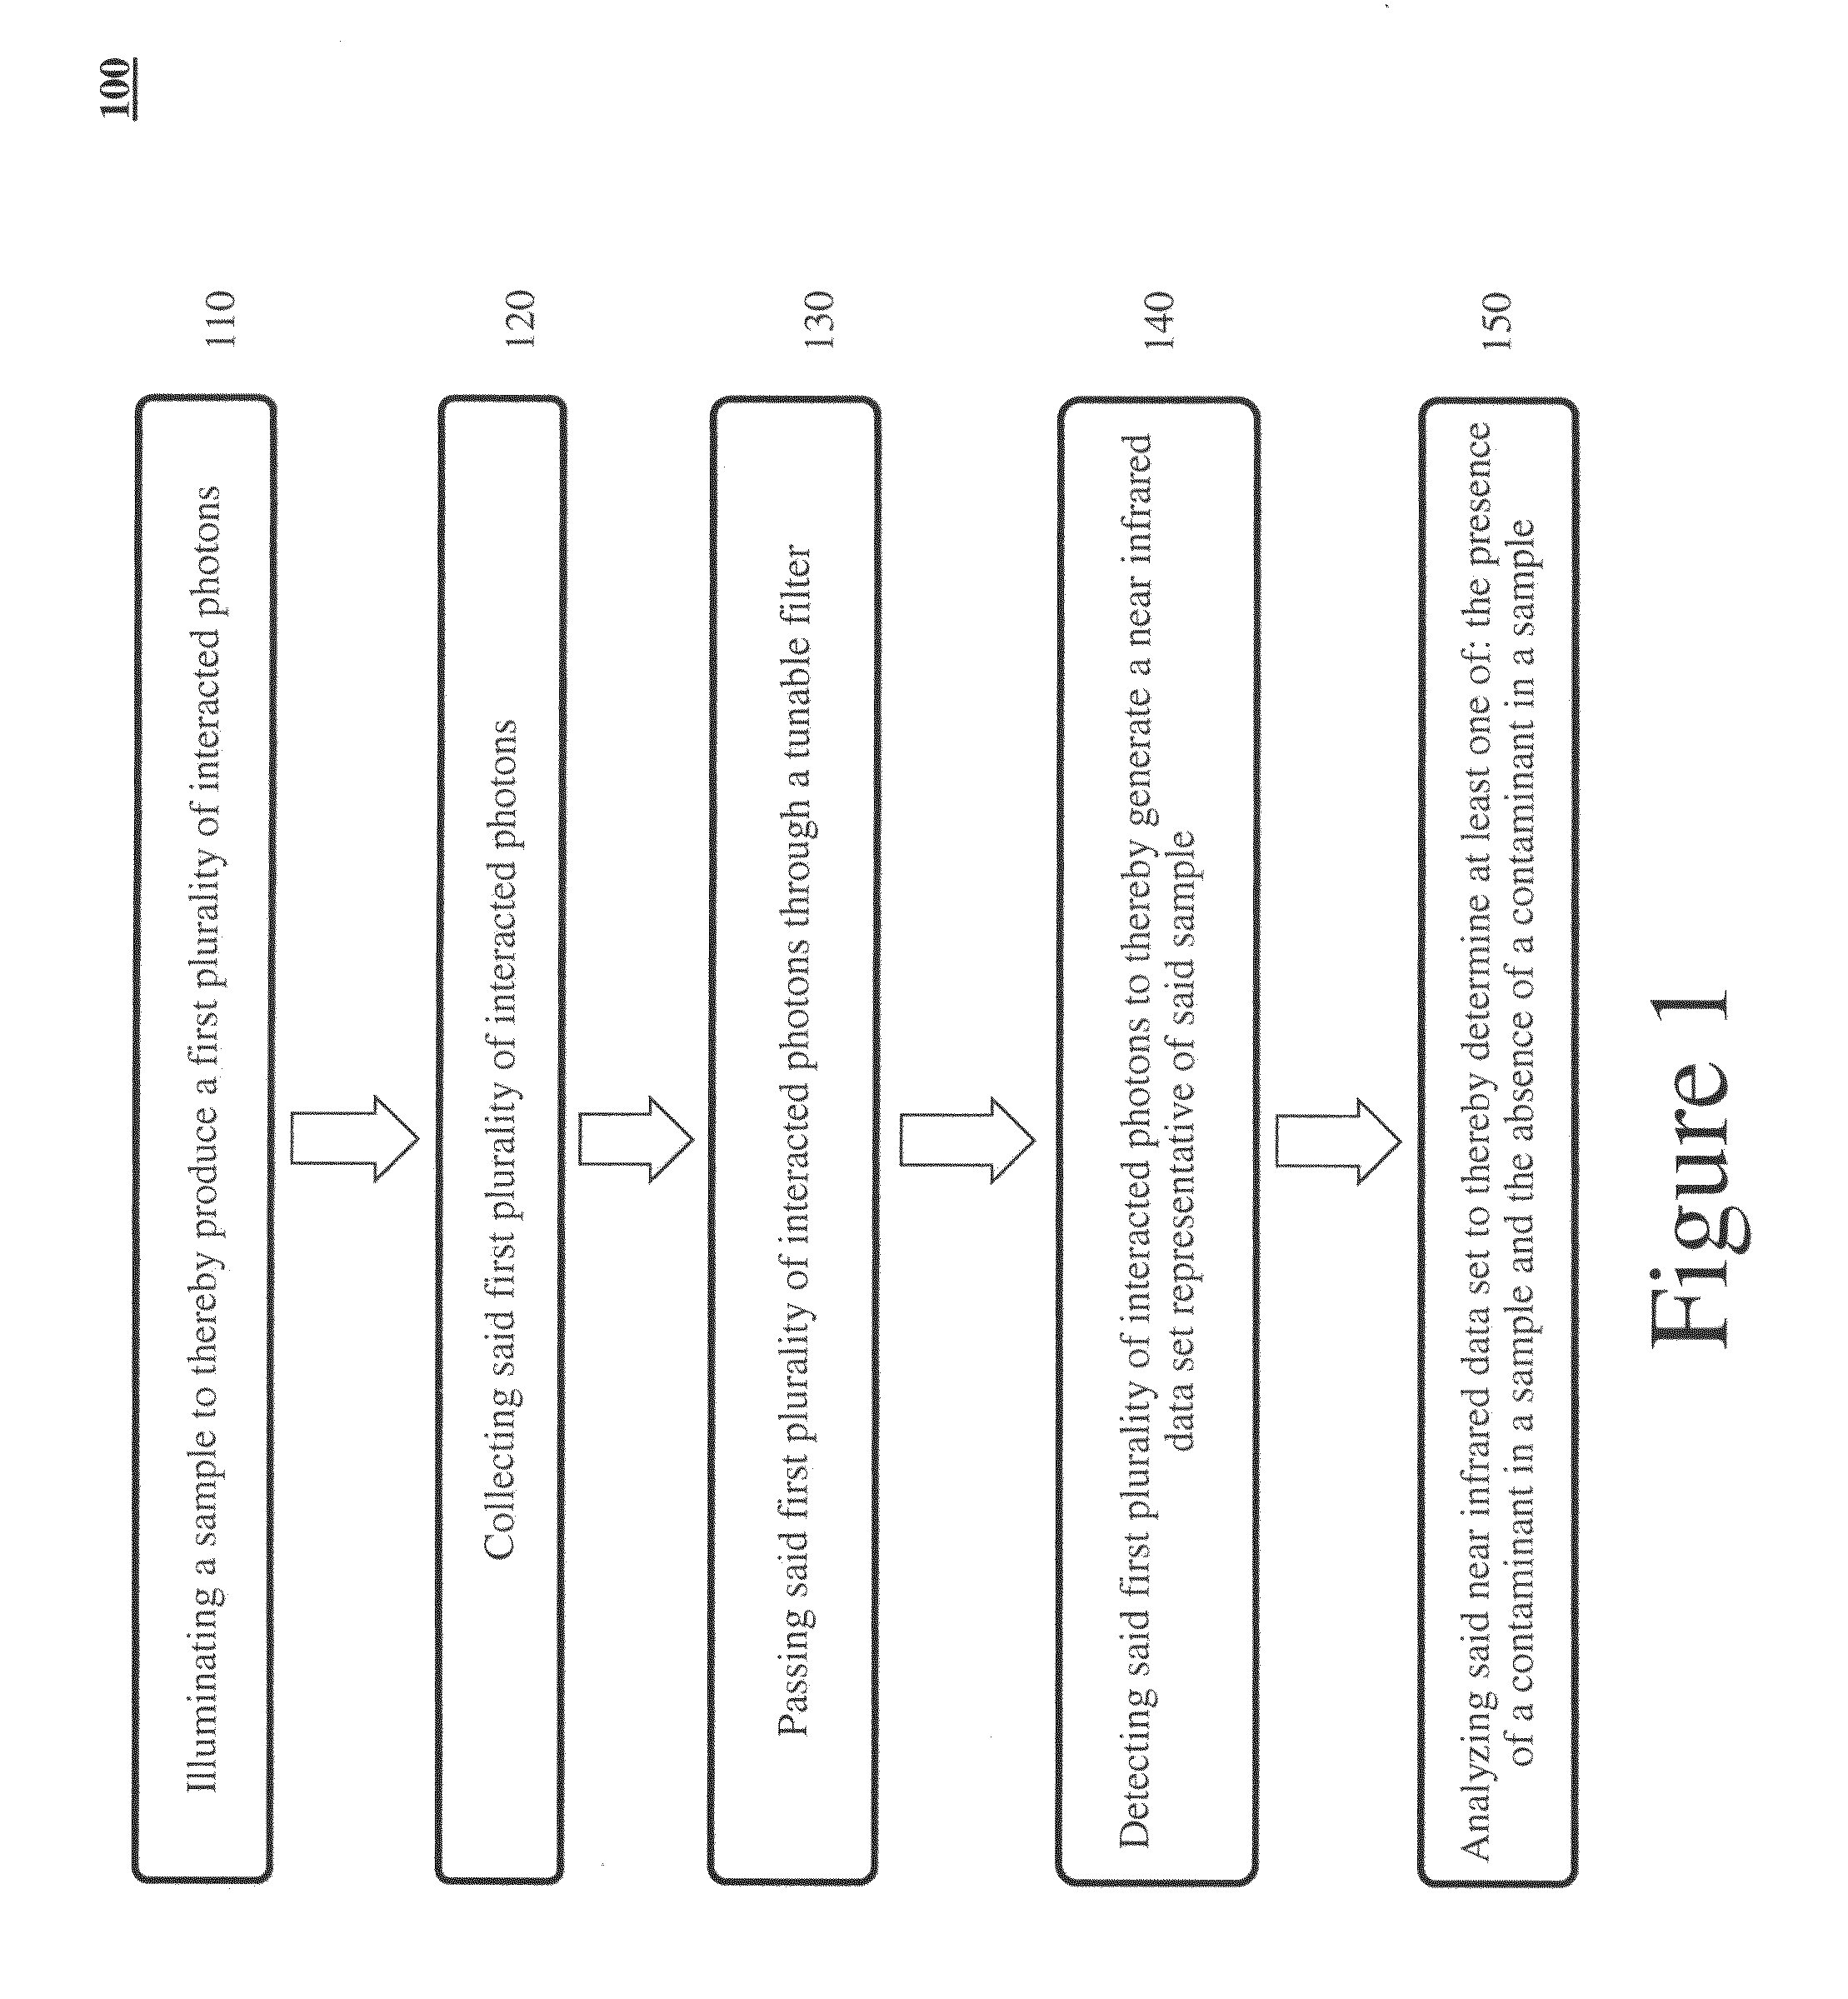 System and method for detecting contaminants in a sample using near-infrared spectroscopy